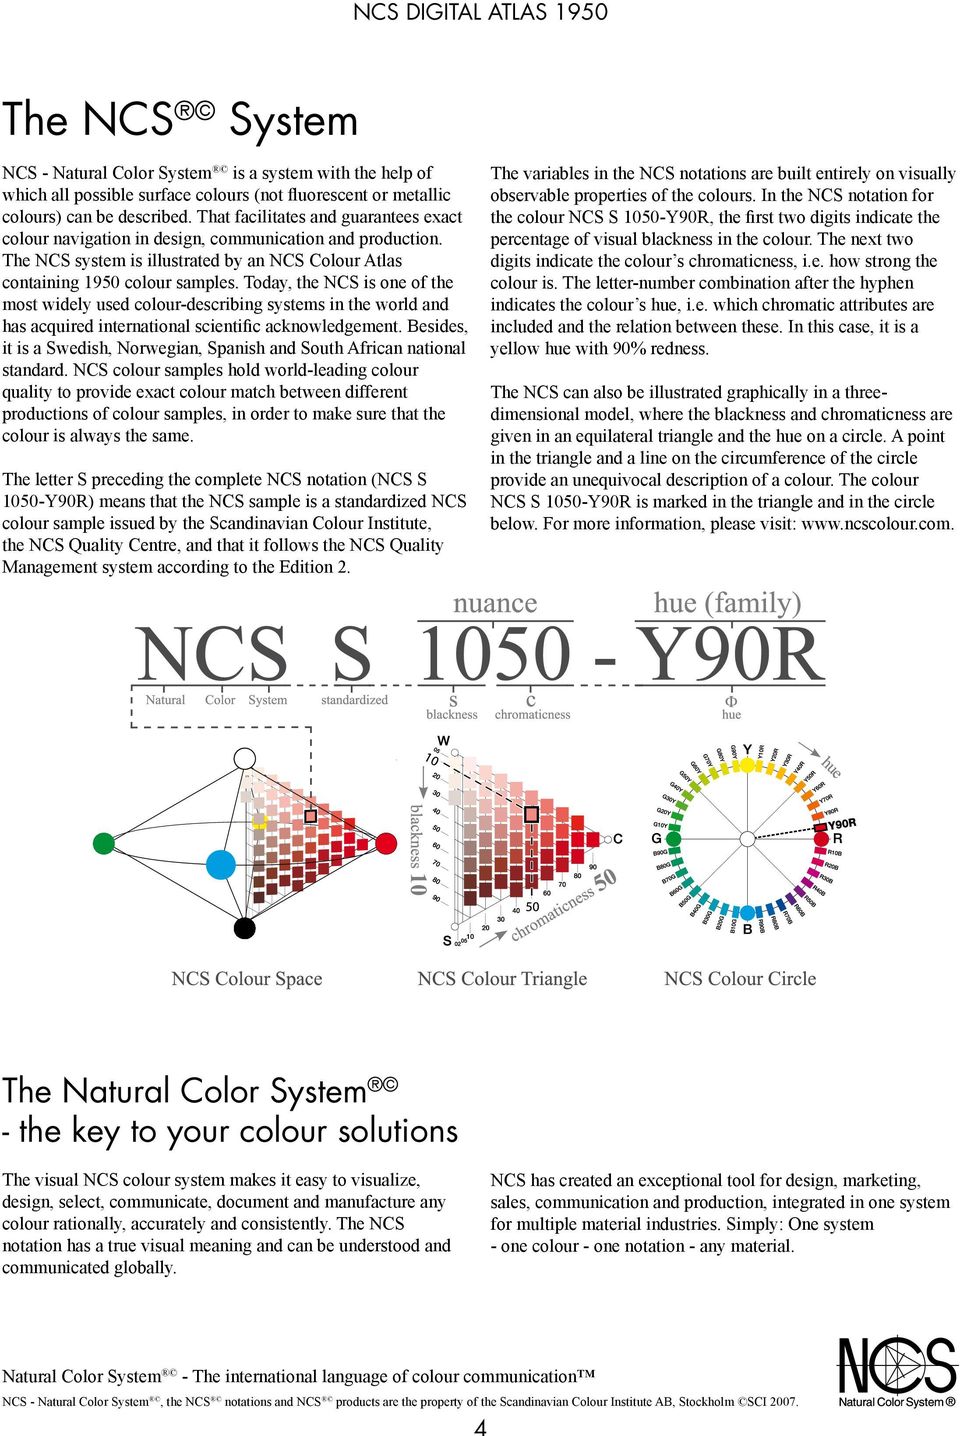 Today, the N is one of the most widely used colour-describing systems in the world and has acquired international scientific acknowledgement.